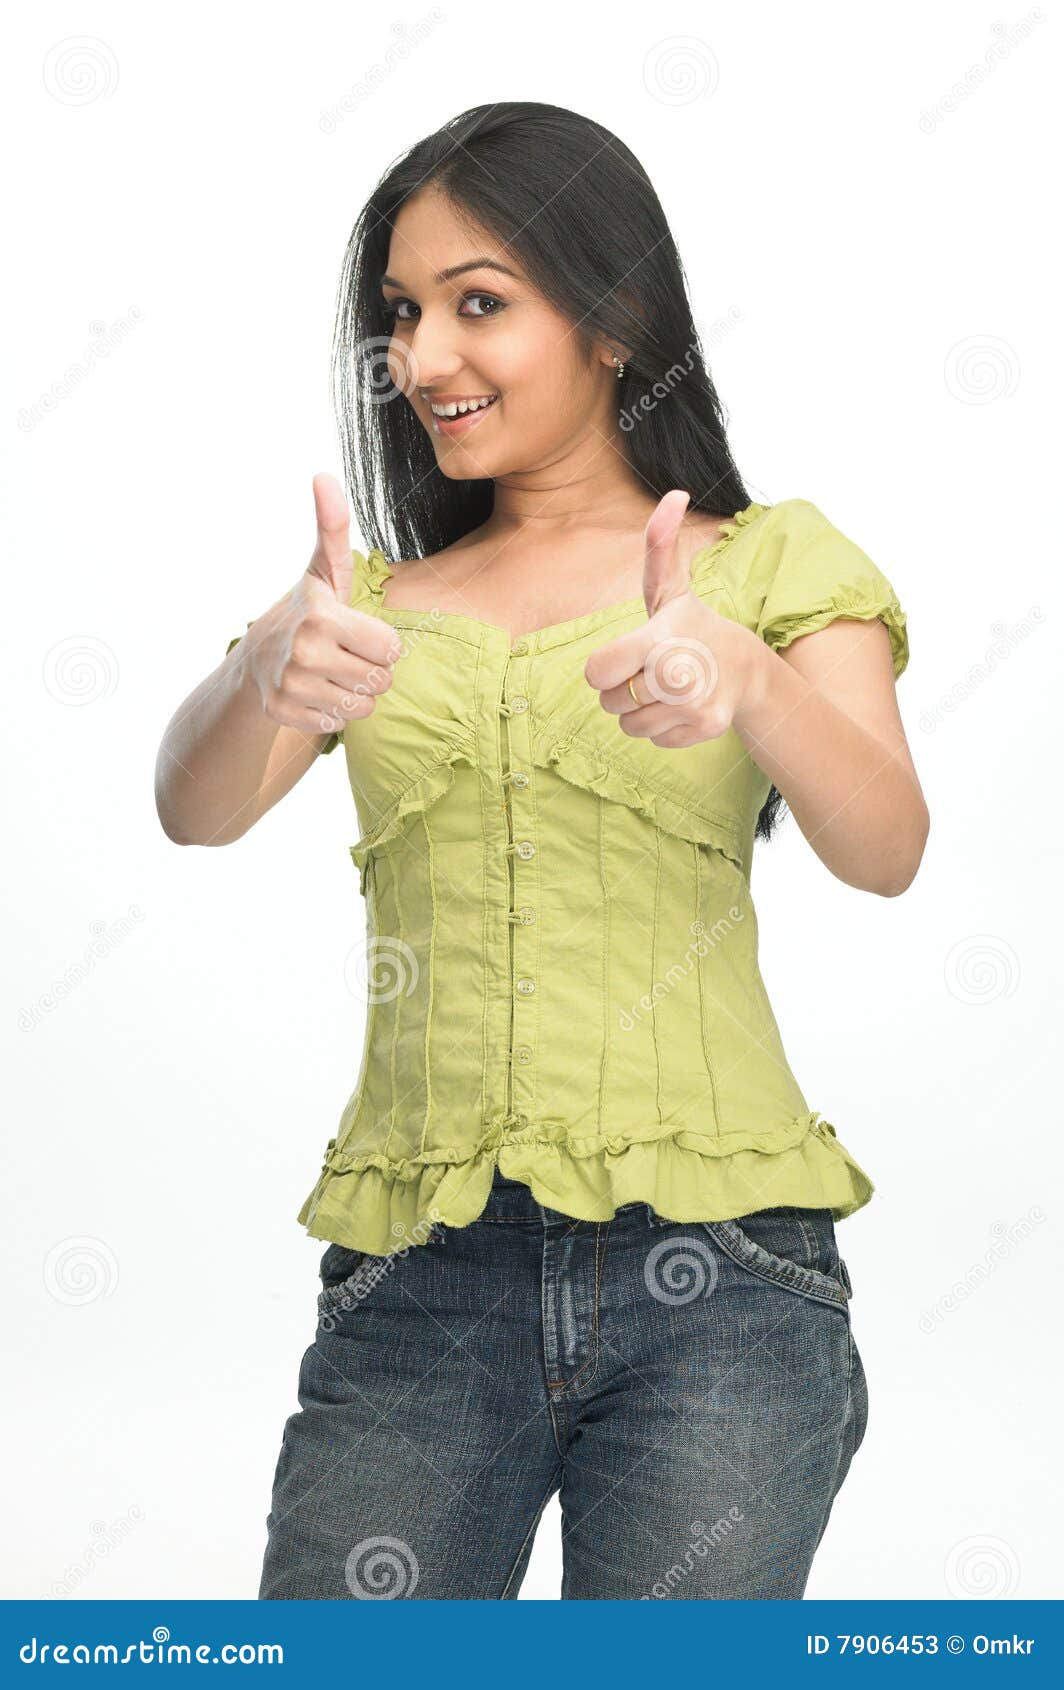 Indian Teenage Girl In Challenge Expression Stock Photos 